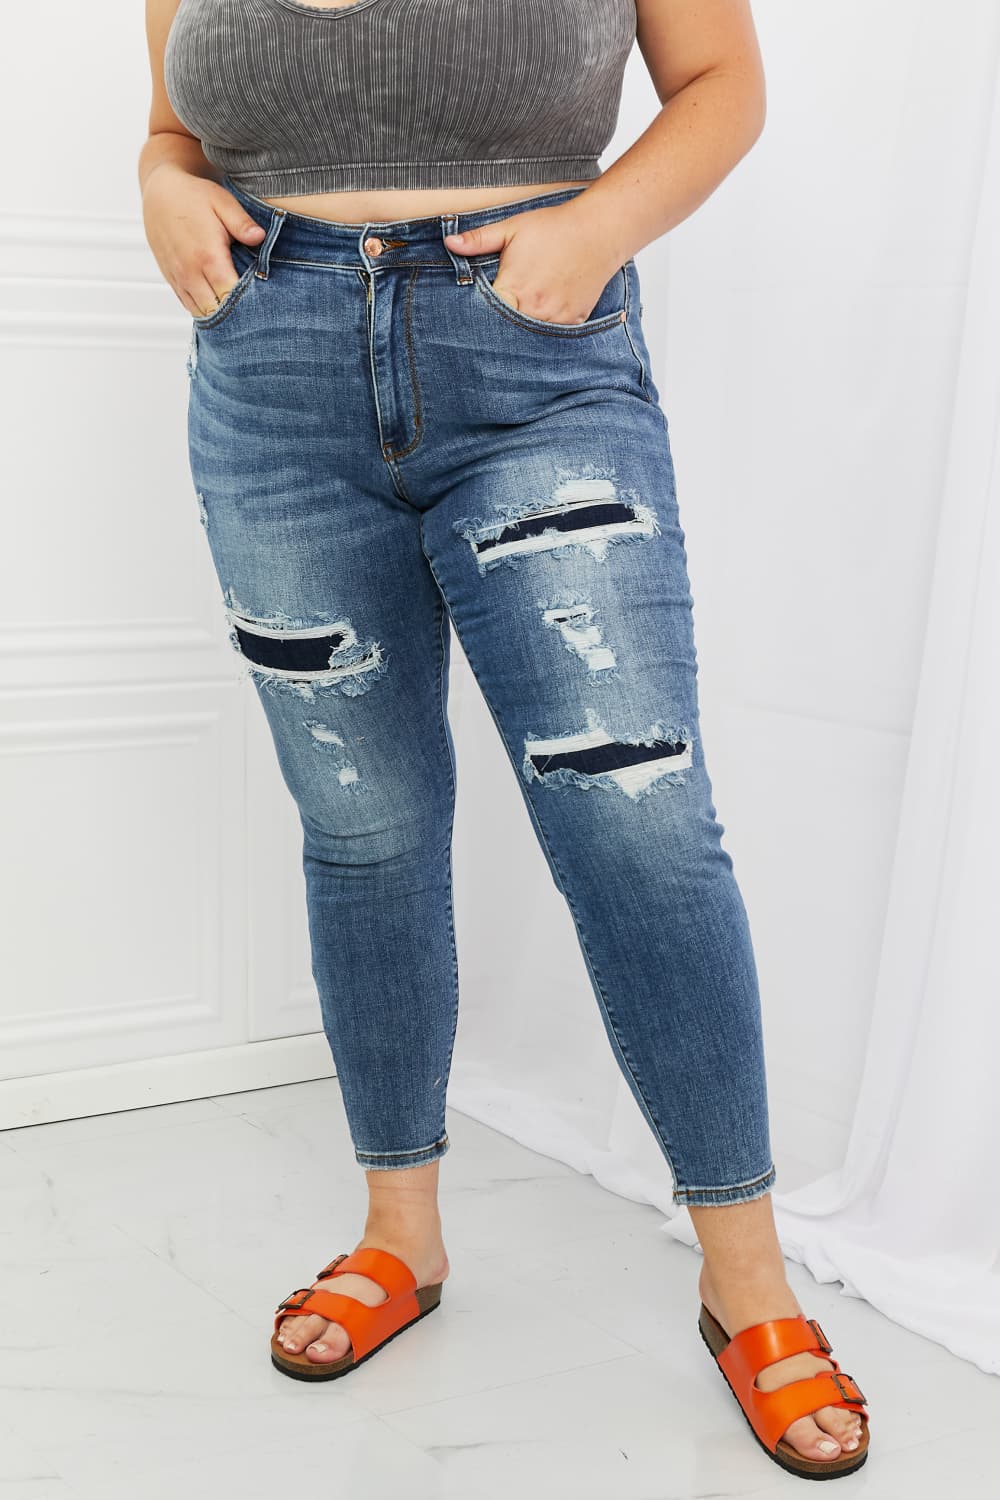 Judy Blue Dahlia Full Size Distressed Patch Jeans Print on any thing USA/STOD clothes